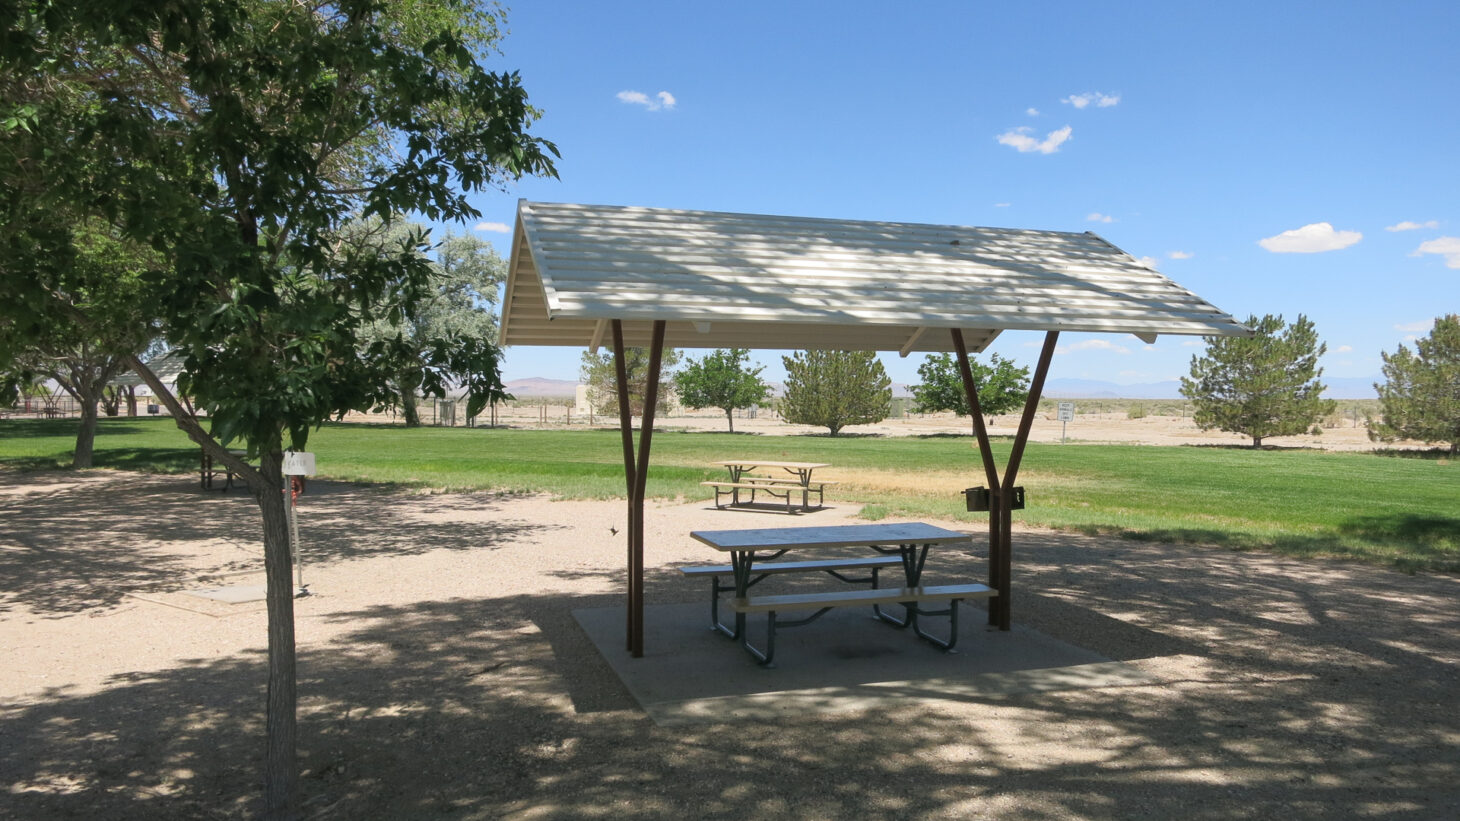 Picnic table with shaded overhang at a highway rest stop